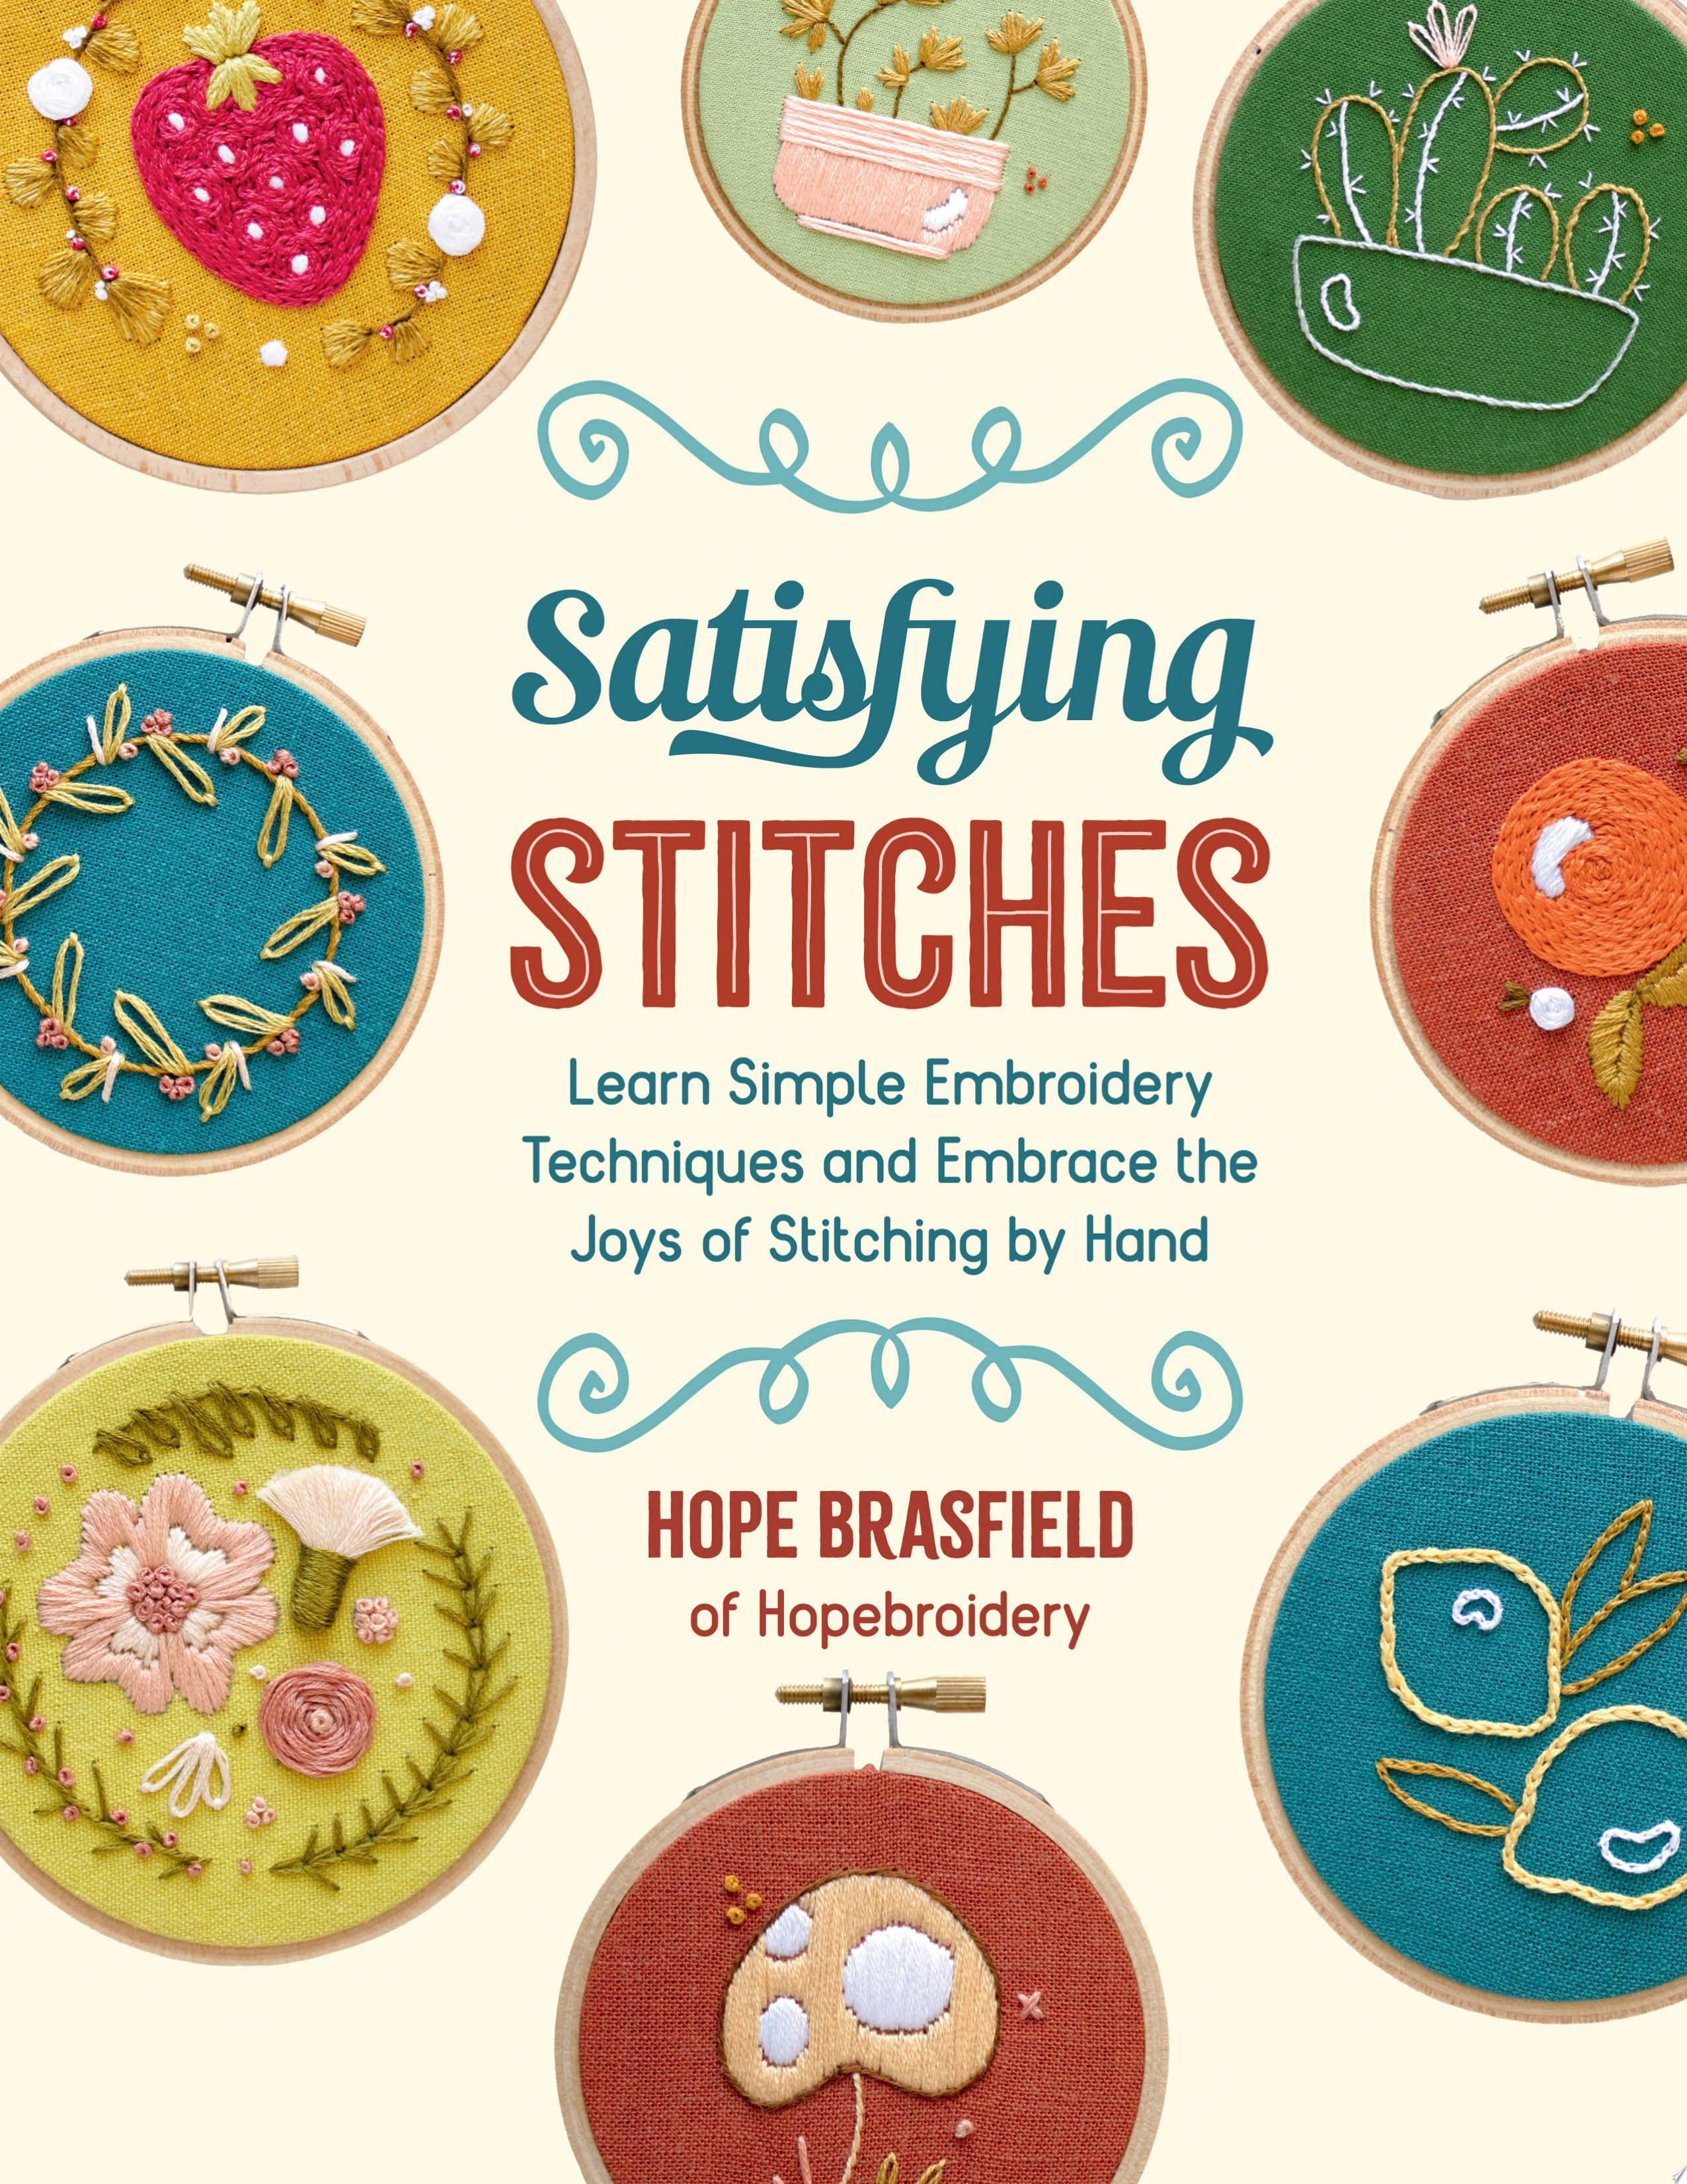 Image for "Satisfying Stitches"